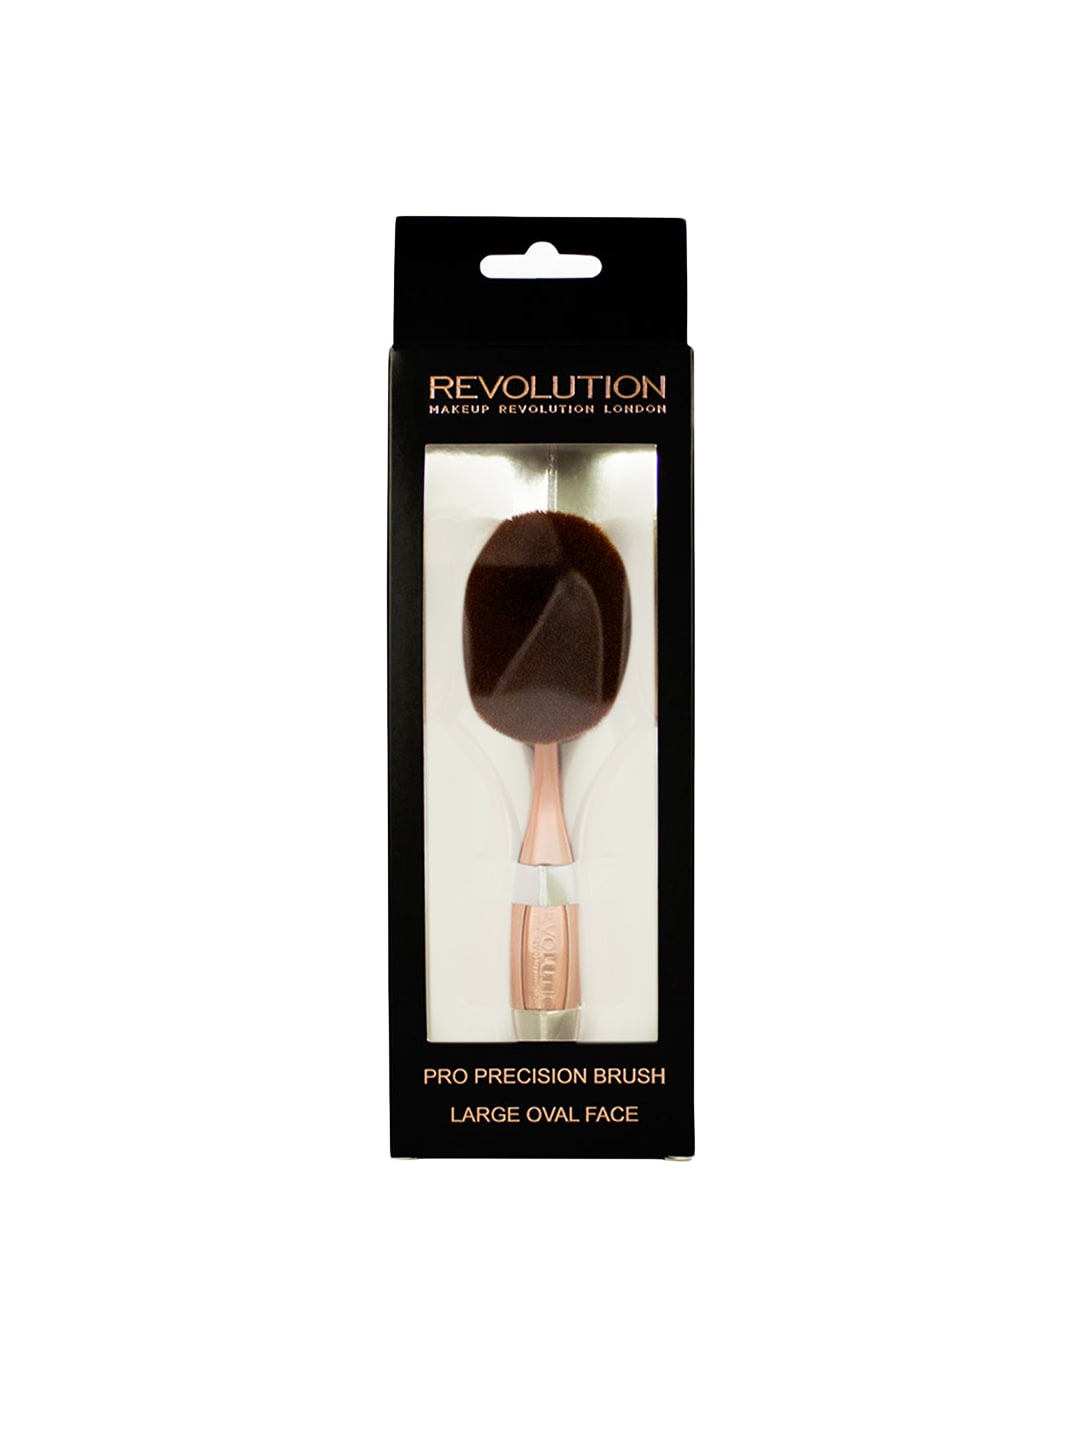 Makeup Revolution London Pro Precision Large Oval Face Brush Price in India